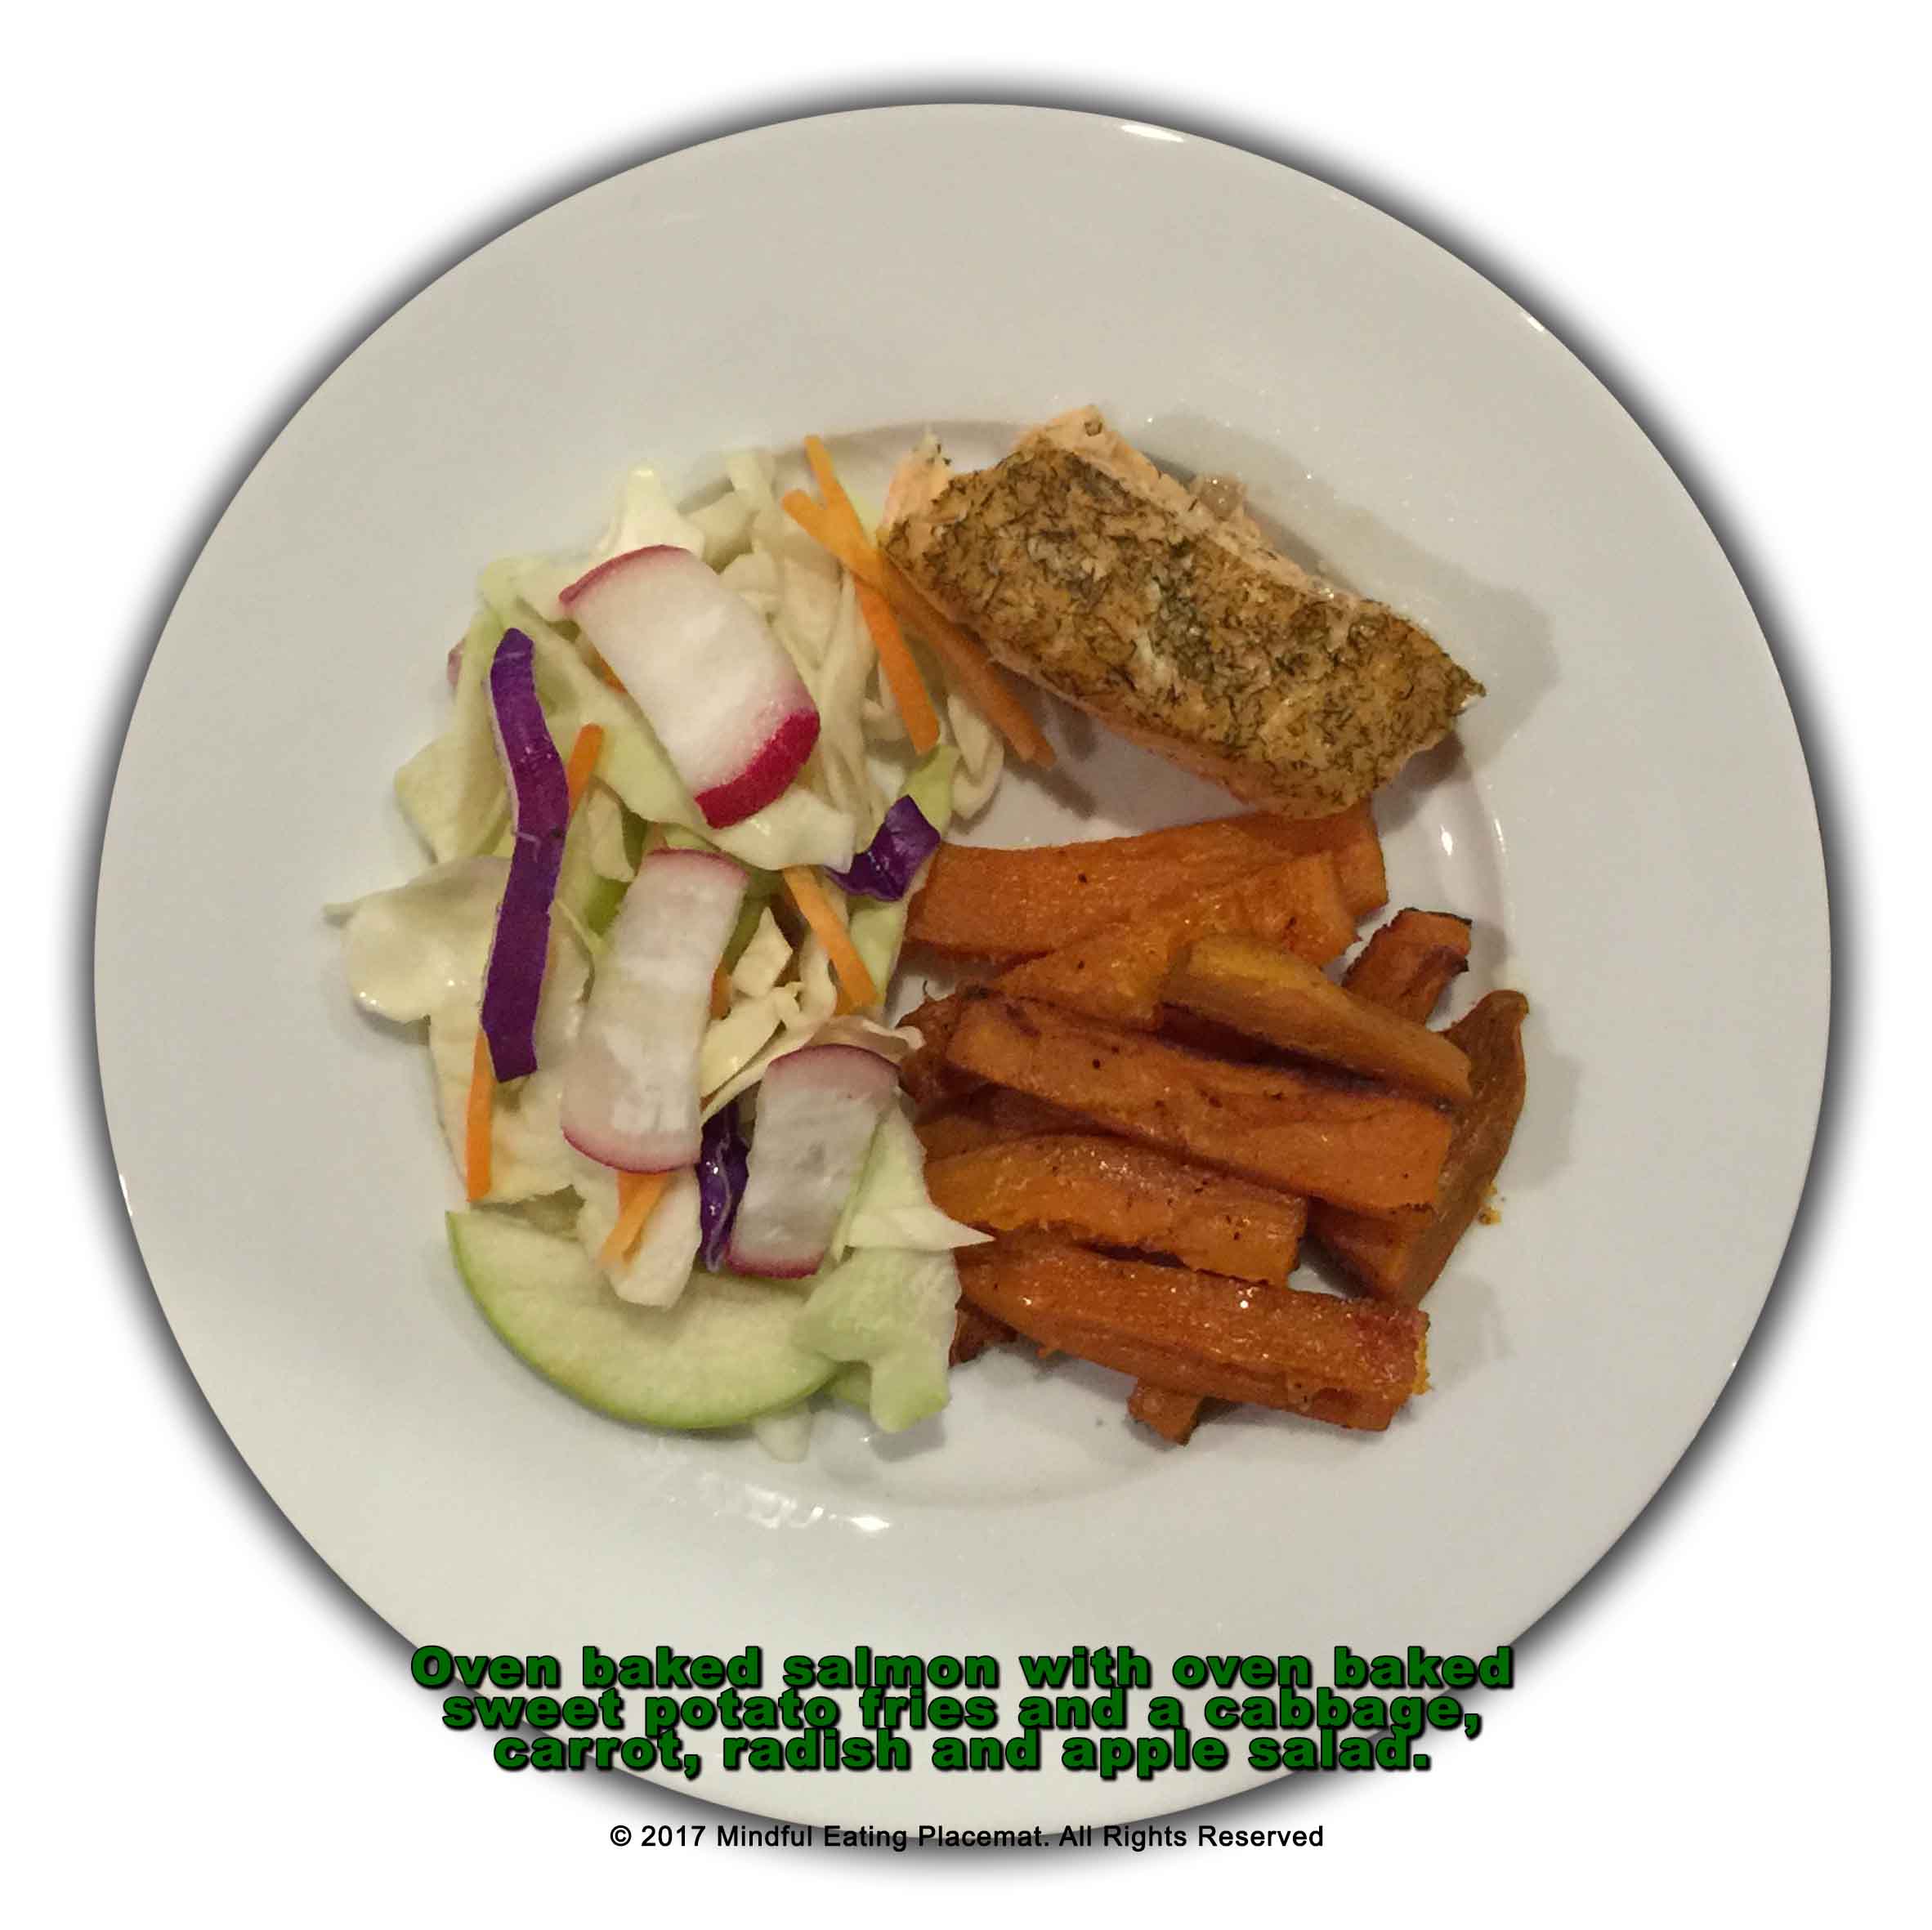 Oven baked salmon with sweet potato fries and salad